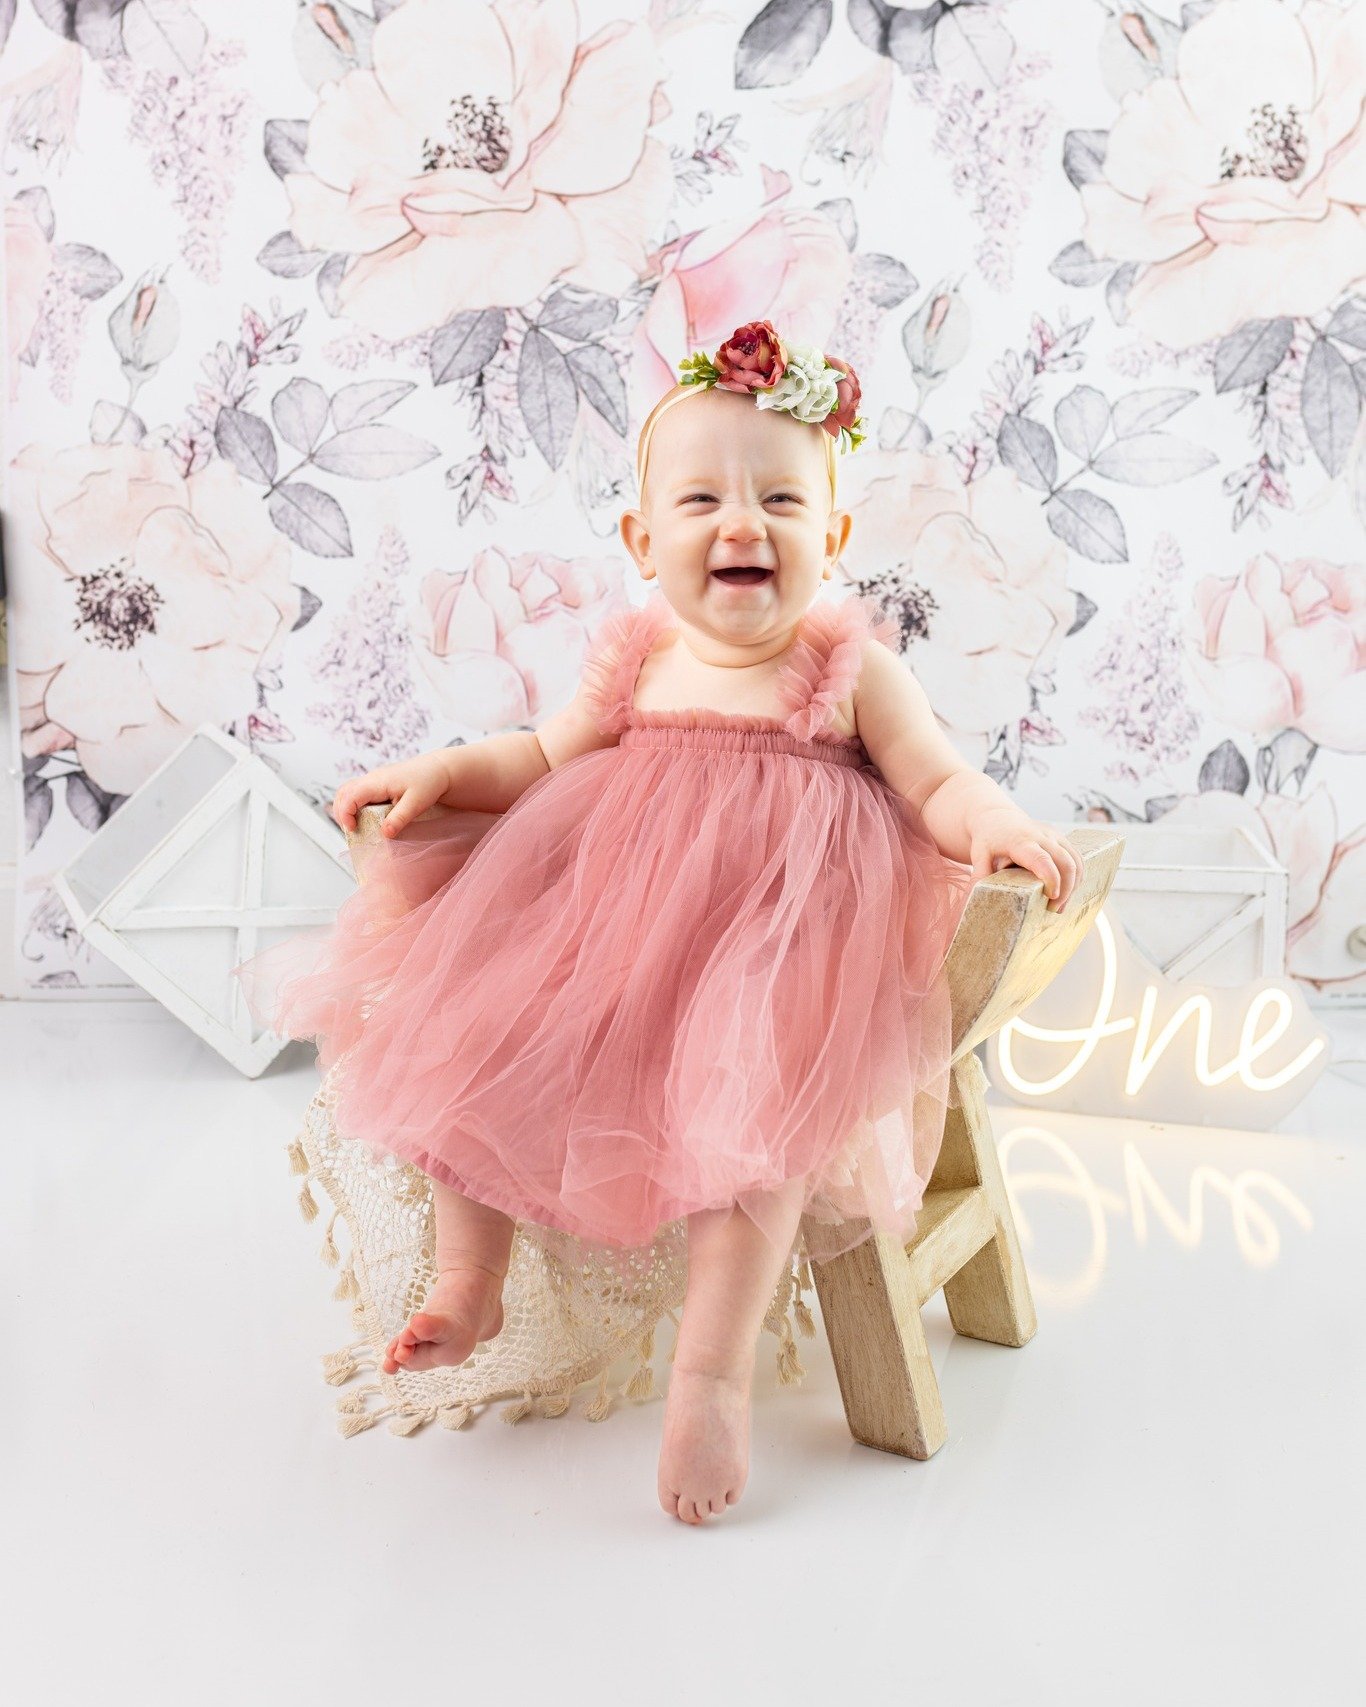 Every little giggle, every tiny step, and each heartwarming glance &ndash; they all weave into the enchanting tapestry of childhood. 🌟 Today, I had the absolute joy of photographing a precious one-year-old princess, and oh, what a delightful adventu